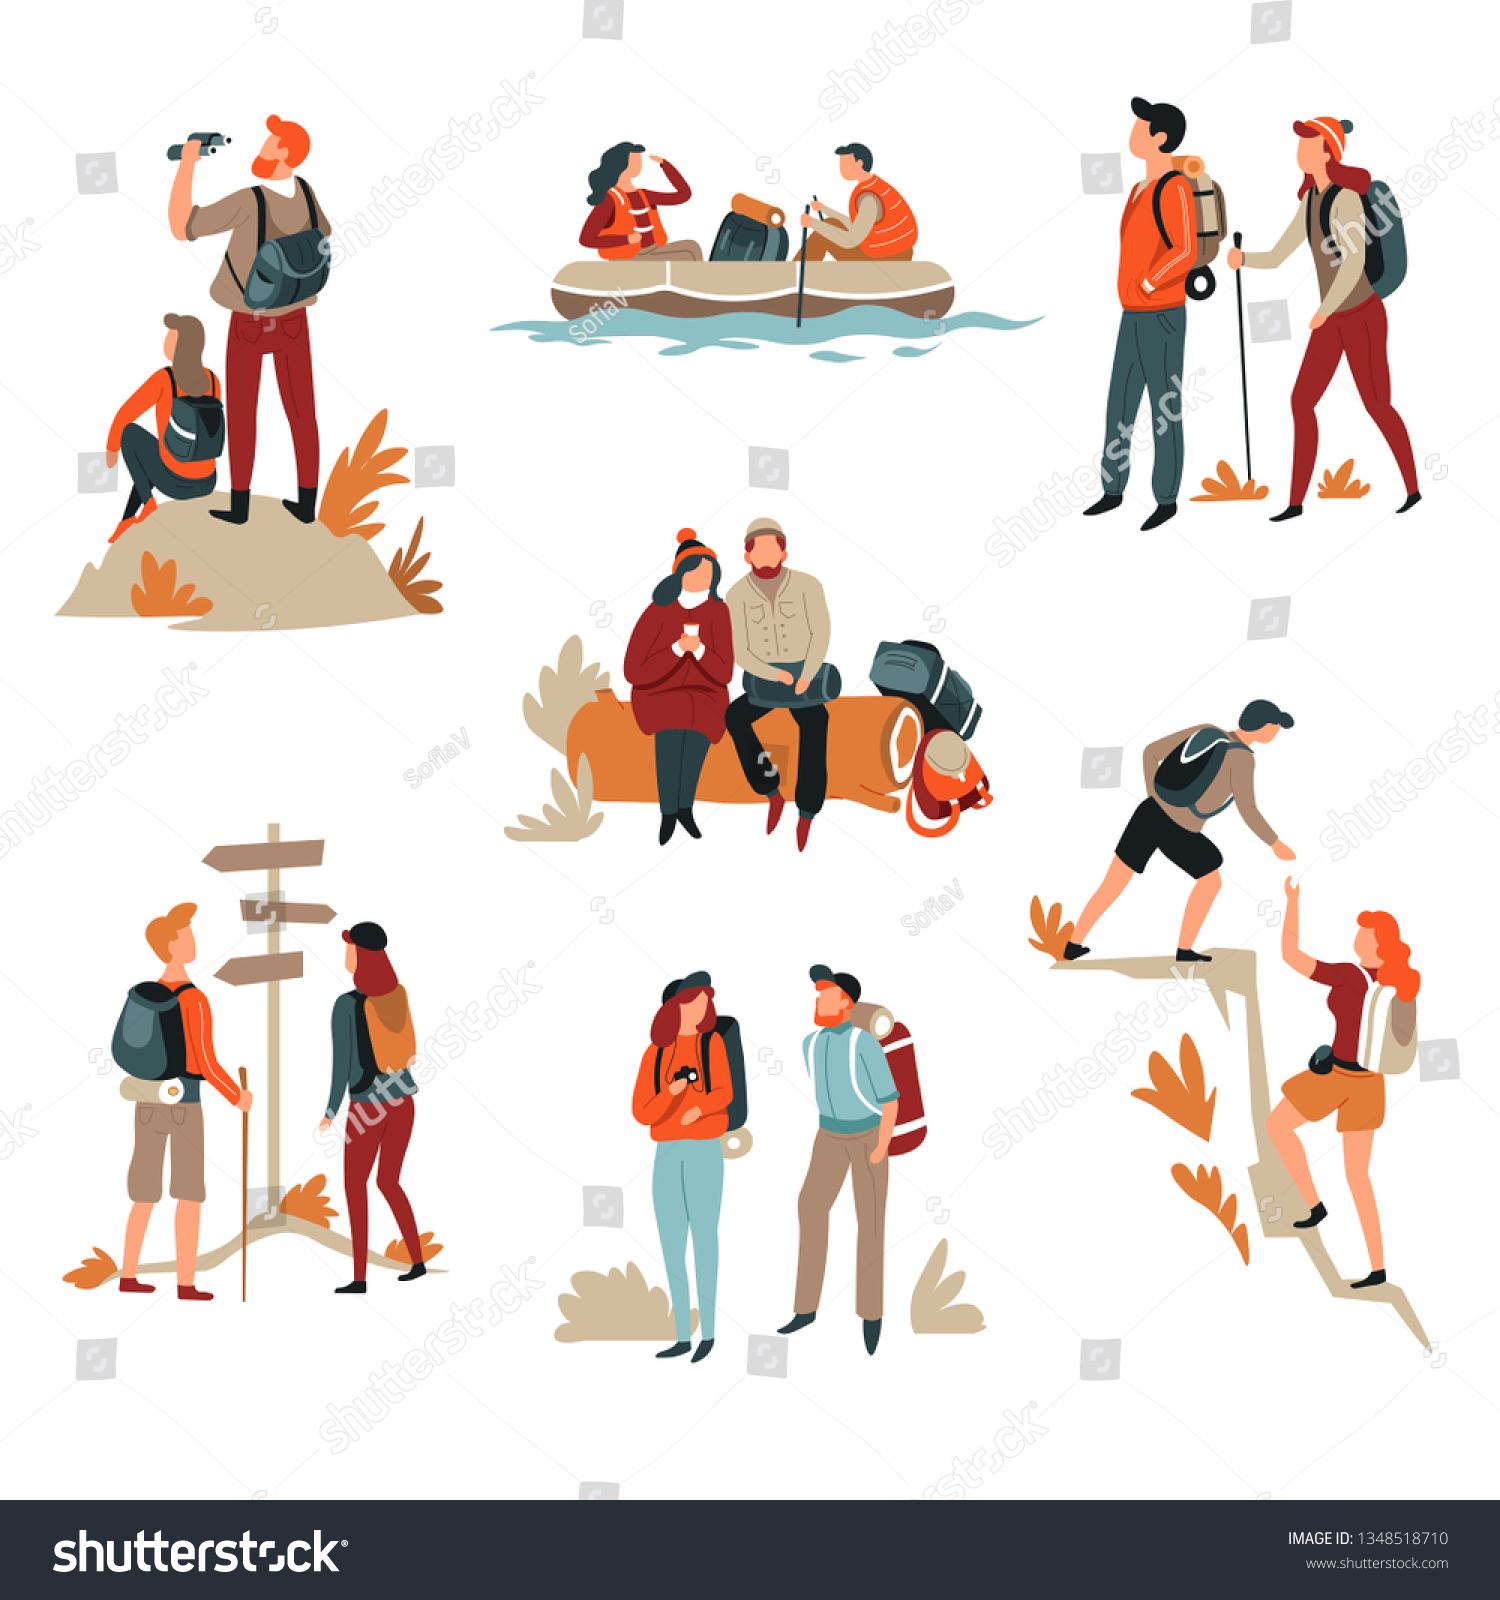 Traveling couple hiking man and woman active lifestyle outdoor activity vector walking trip mountains or cliff river rafting inflatable boat backpack and tent camping backpacking boyfriend girlfriend #1348518710